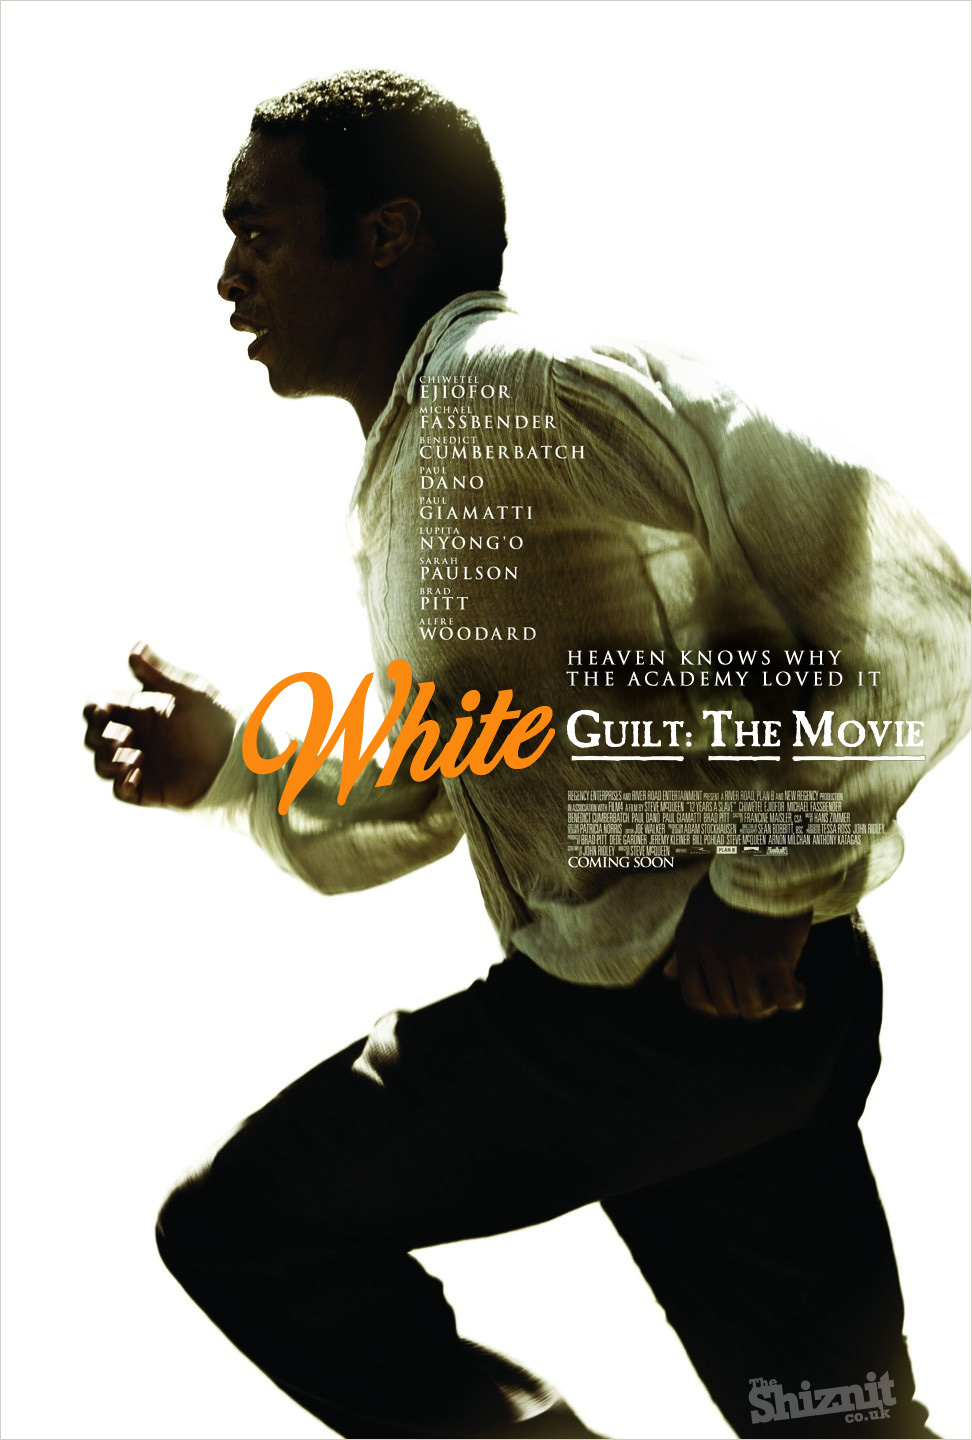 12 Years a Slave 02